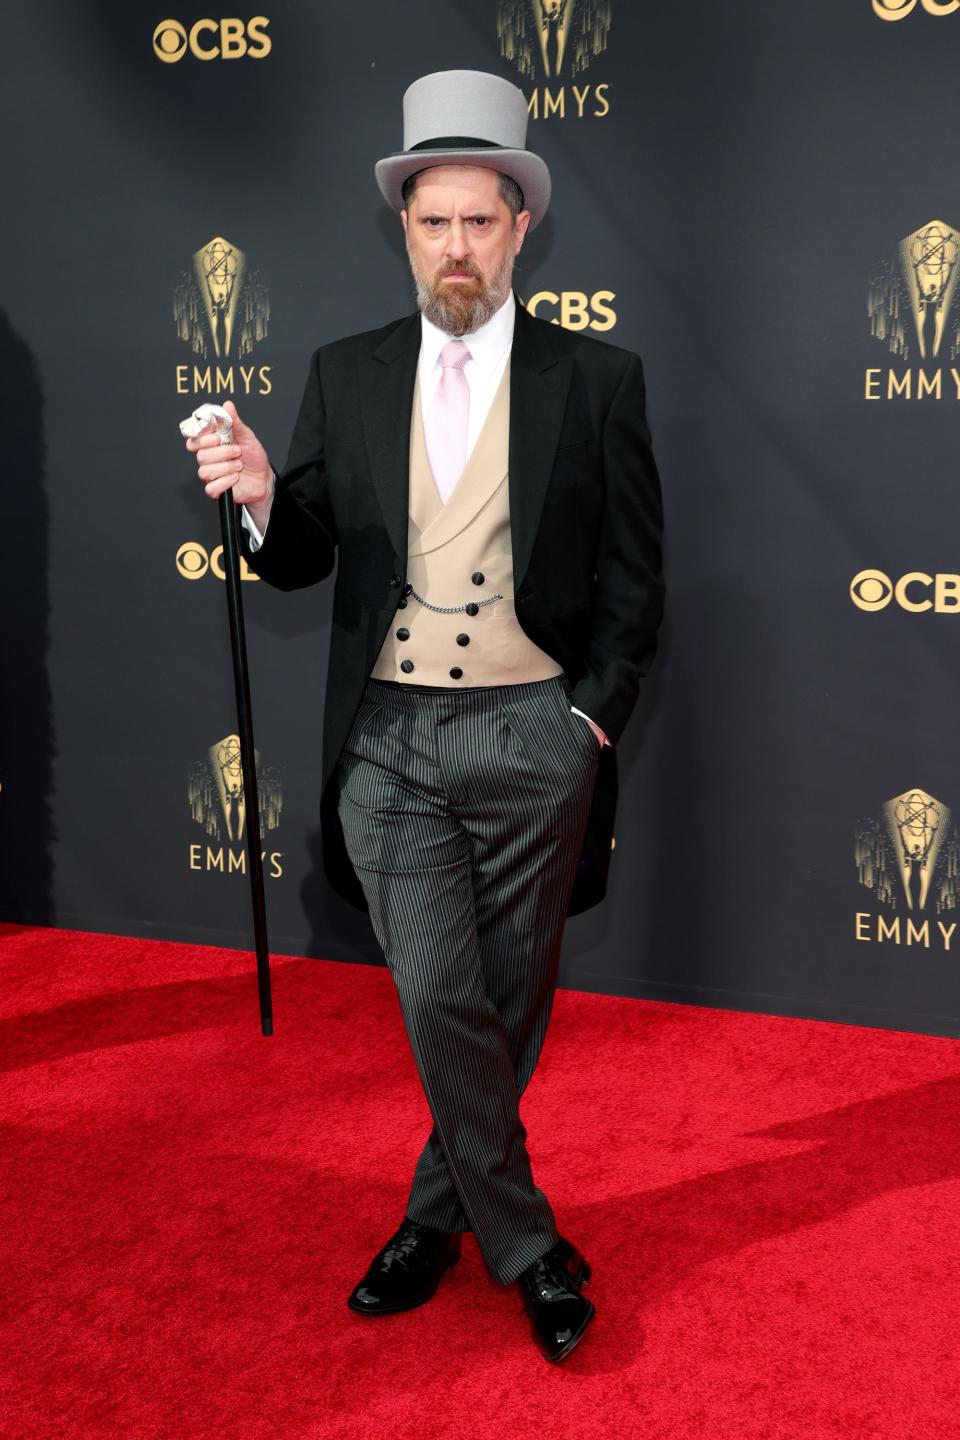 Brendan Hunt wears a morning suit to the Emmy Awards.